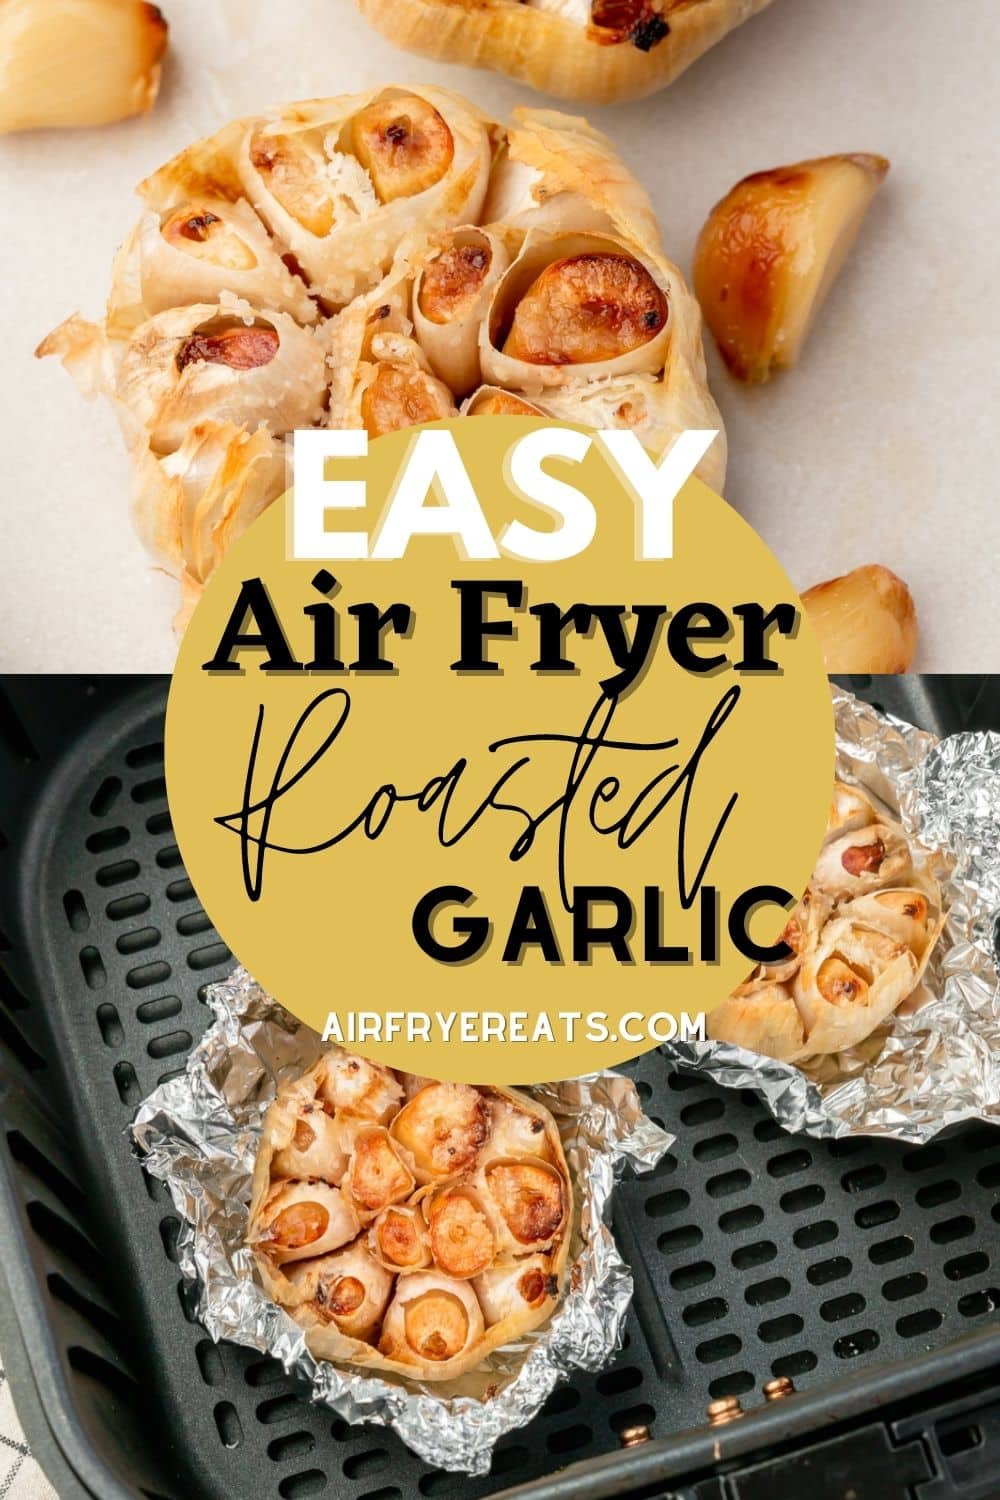 images of garlic roasting in an air fryer. Text circle overlay says "easy air fryer roasted garlic"